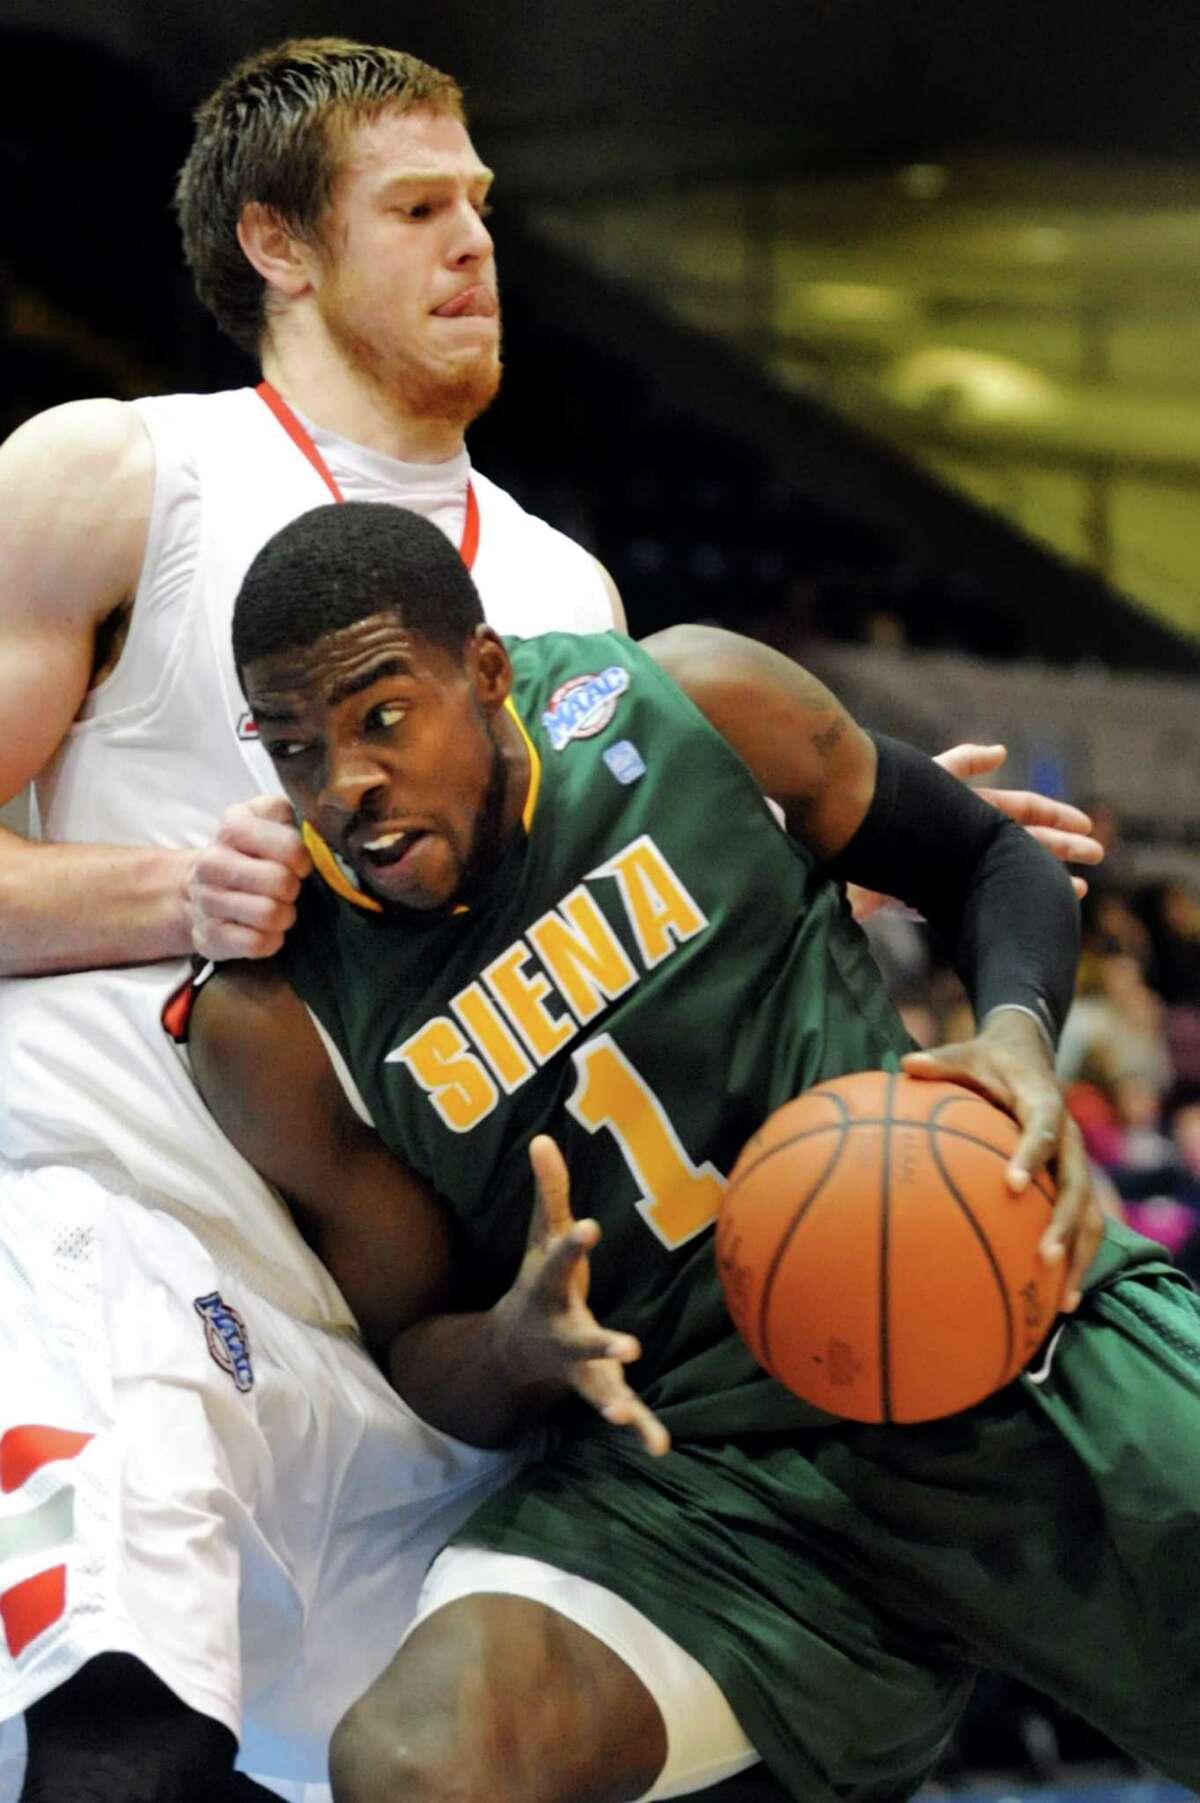 Siena's O.D. Anosike (1), right, tries to get past Marist's Adam Kemp (50) during their first round MAAC Championship basketball game on Friday, March 8, 2013, at MassMutual Center in Springfield, Mass. (Cindy Schultz / Times Union)